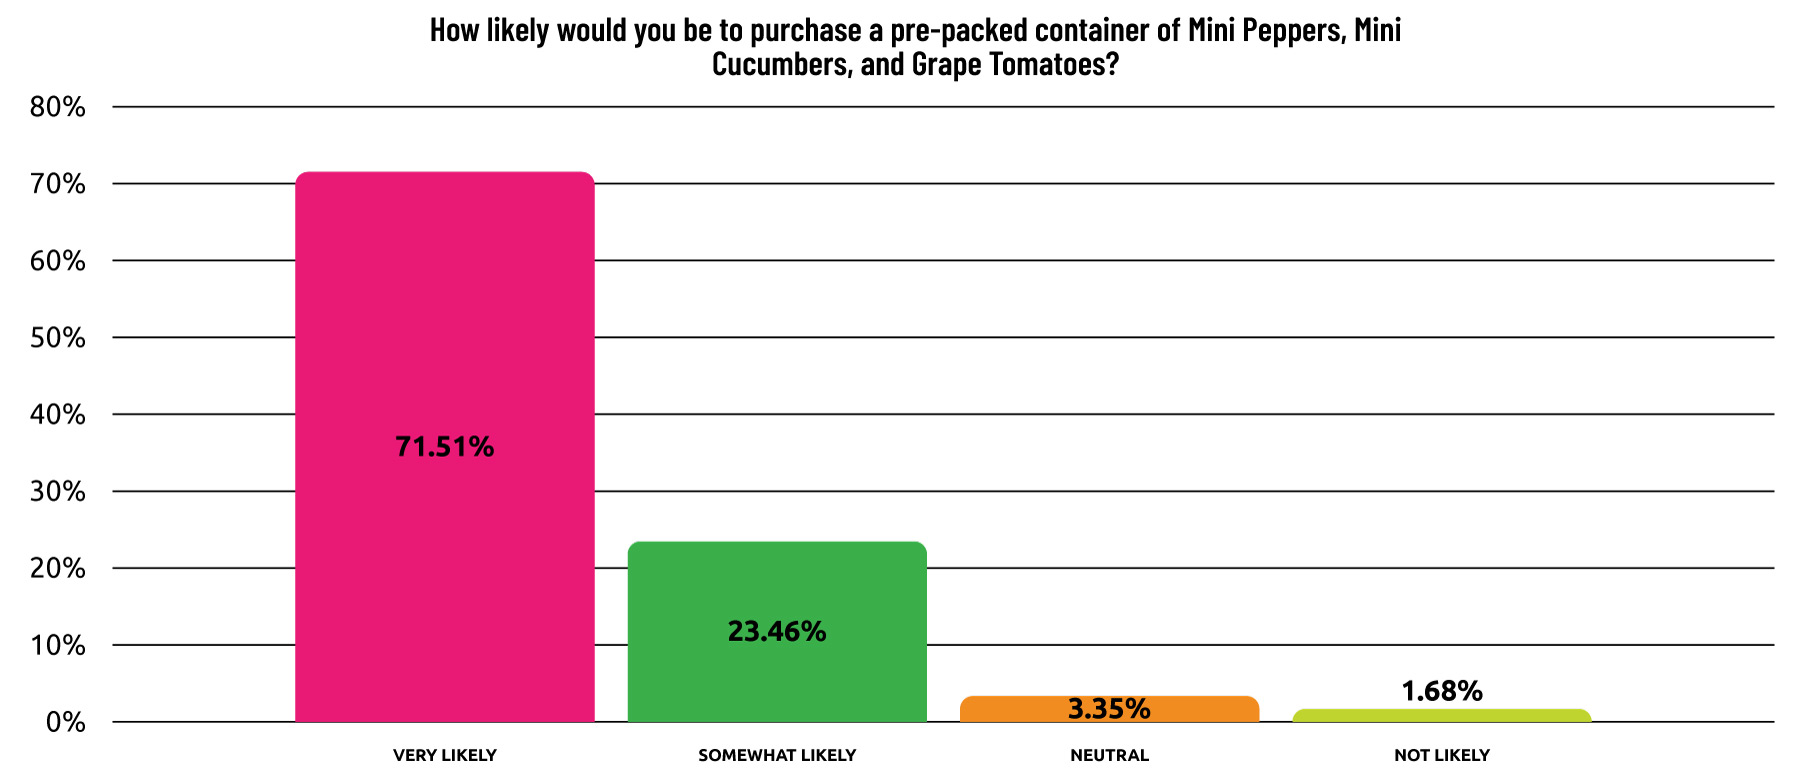 Bar graph showing how likely consumers are to purchase a pre-packaged container of Grape Tomatoes, Mini Cucumbers, and Mini Peppers. Over 71% of consumers responded saying that they are very likely to purchase a package like that.